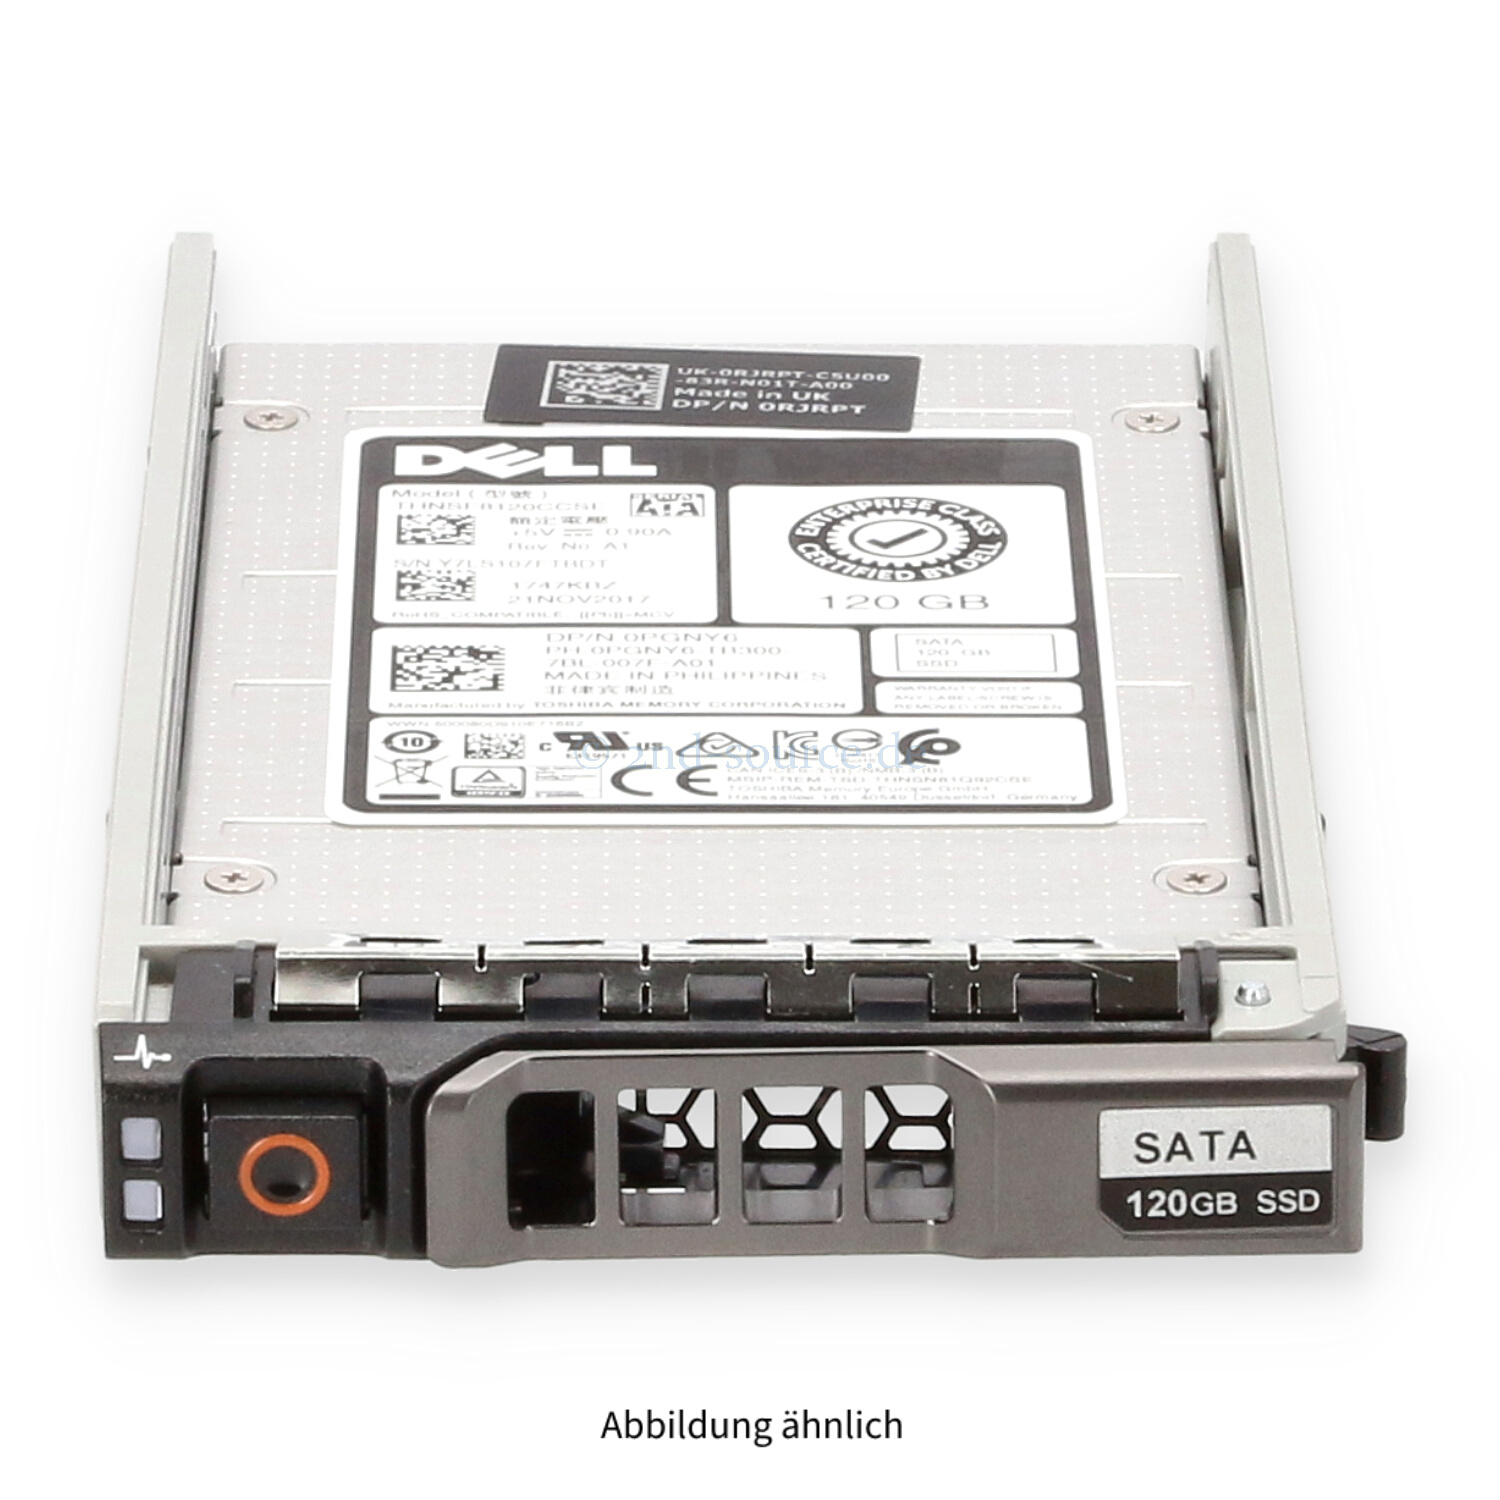 Dell 120GB SATA 6G SFF Mixed Use HotPlug SSD 400-AUUD PGNY6 0PGNY6